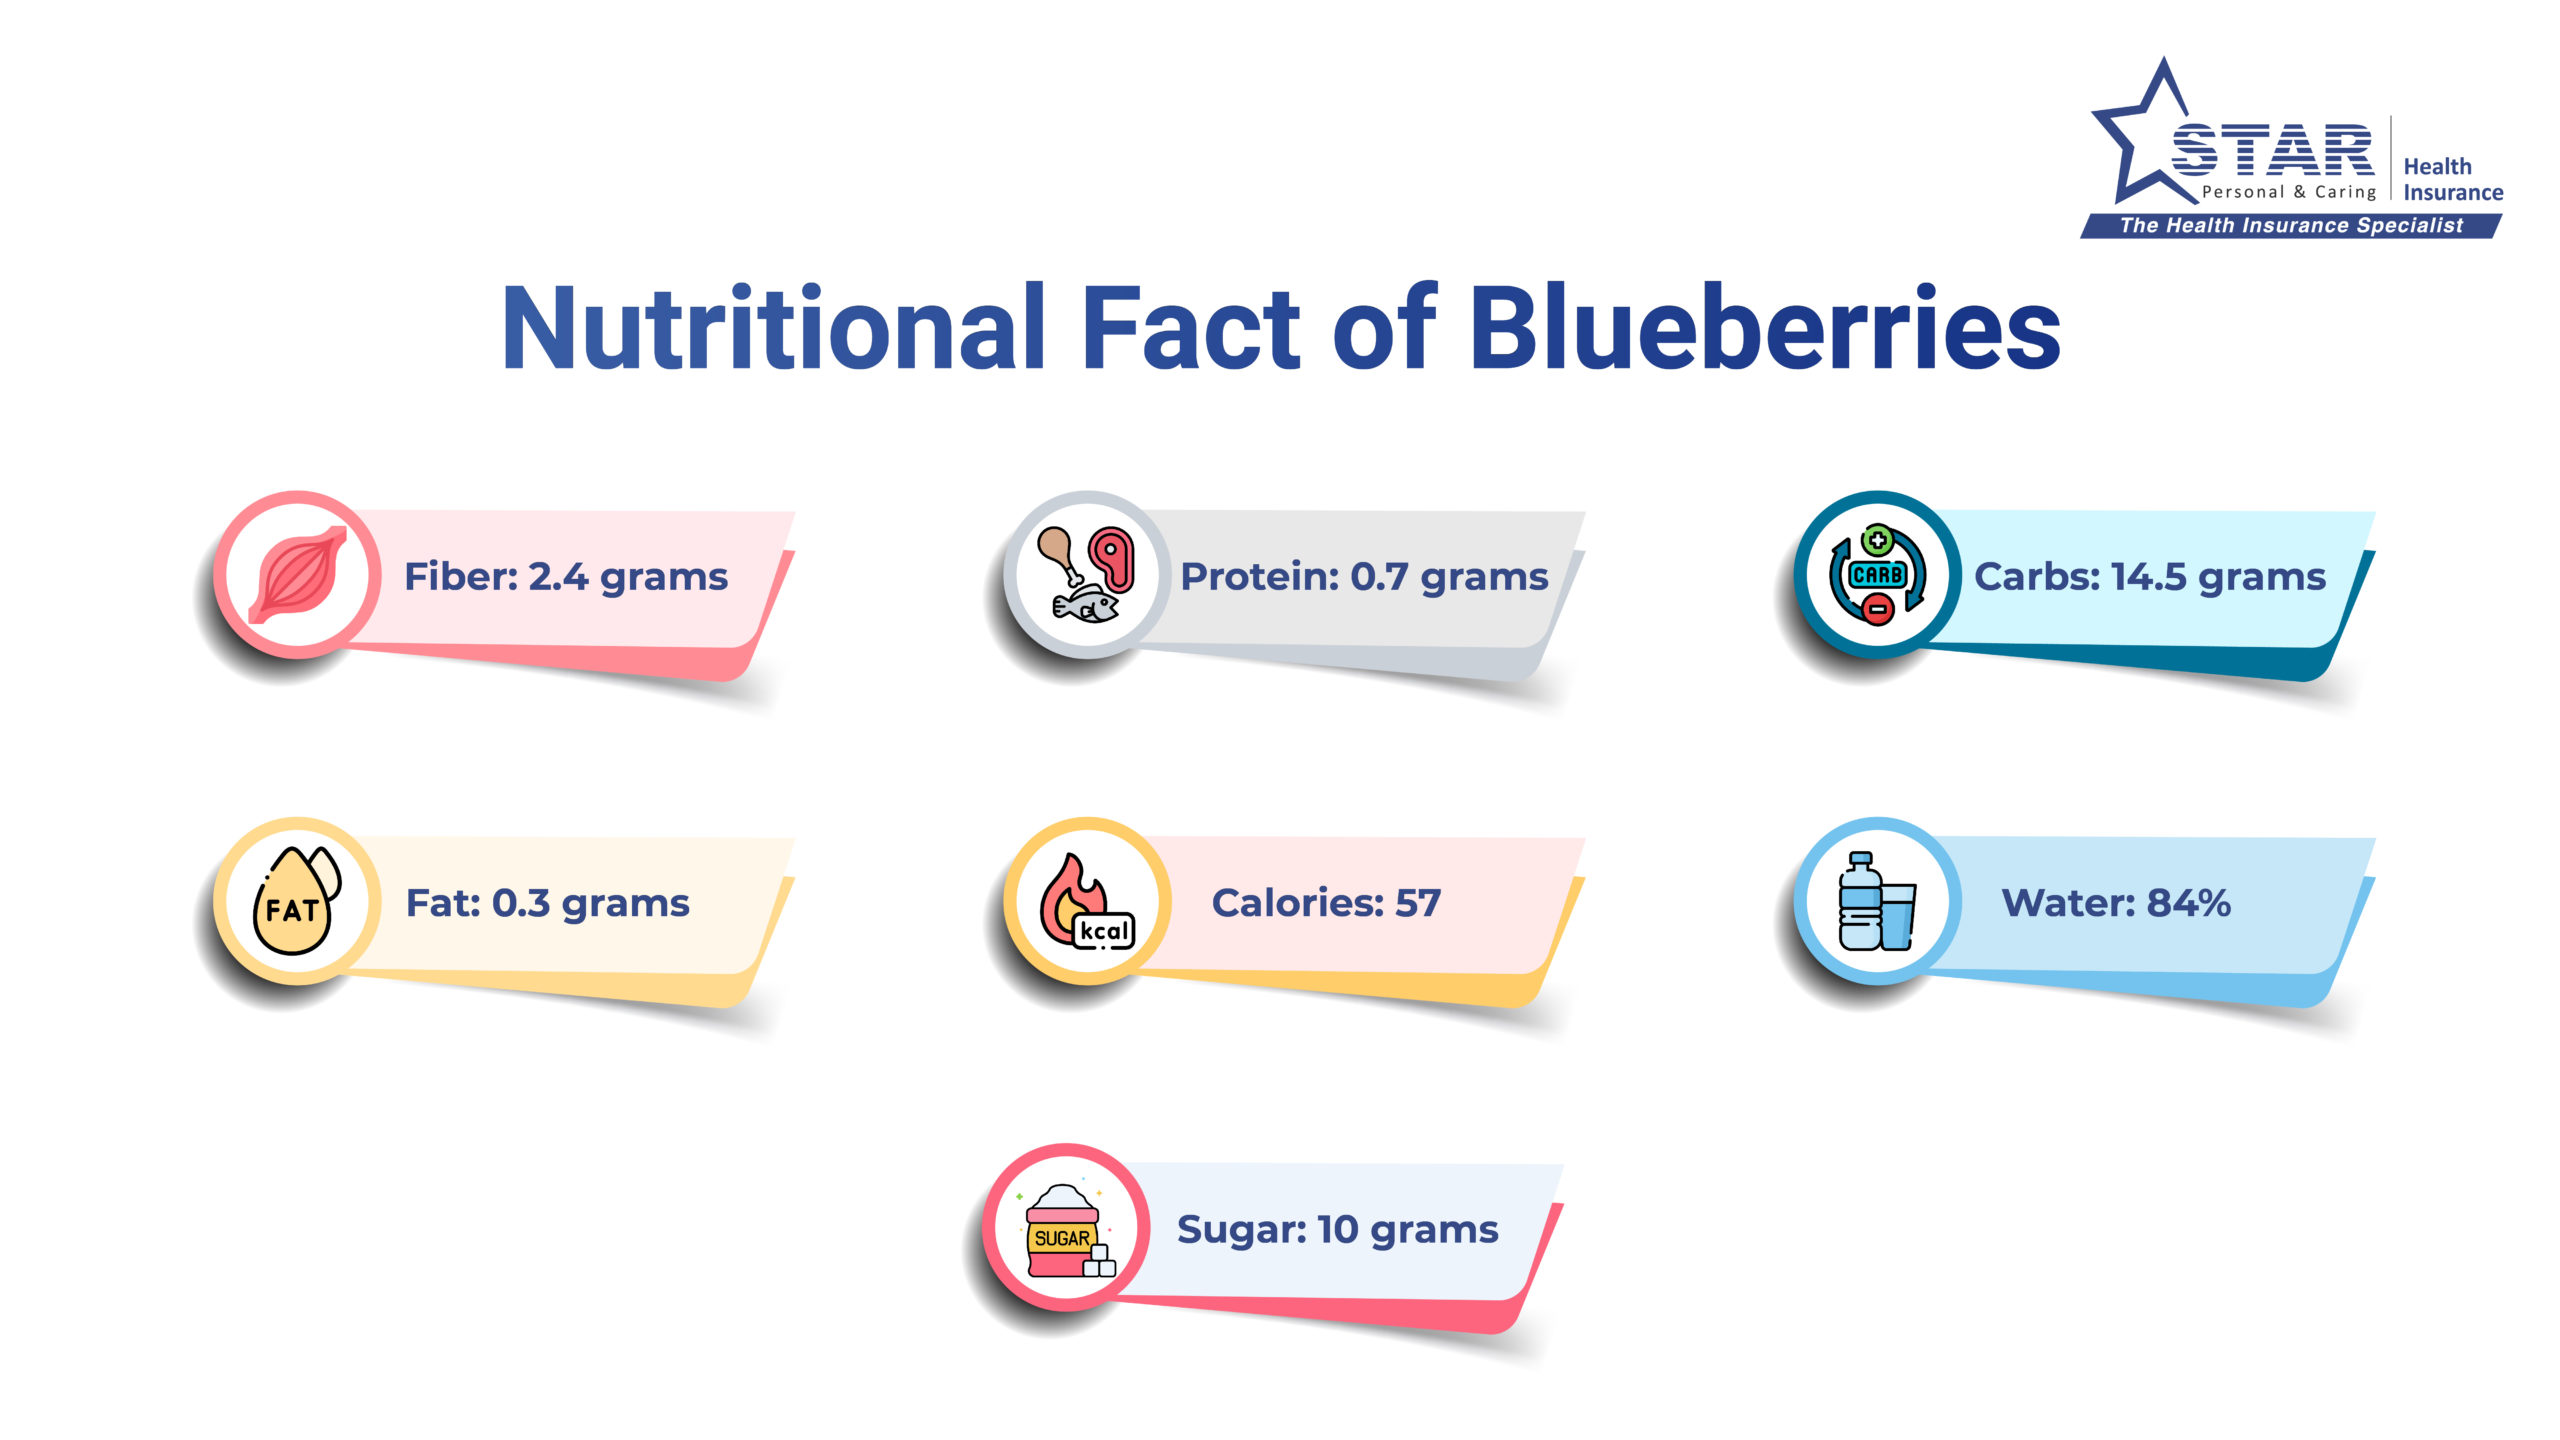 Nutritional Facts of Blueberries